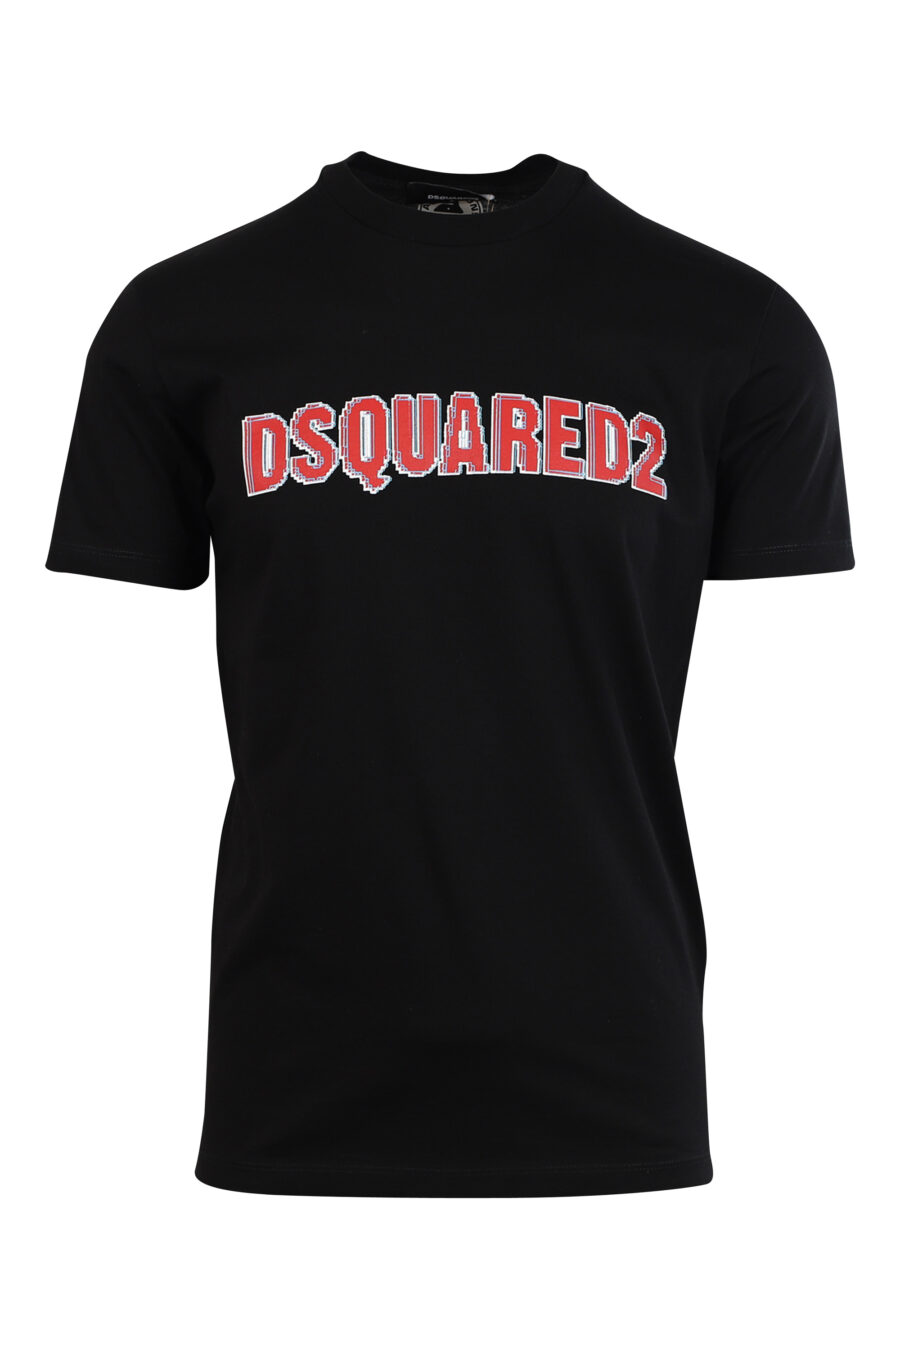 Black T-shirt with red logo - 8052134946053